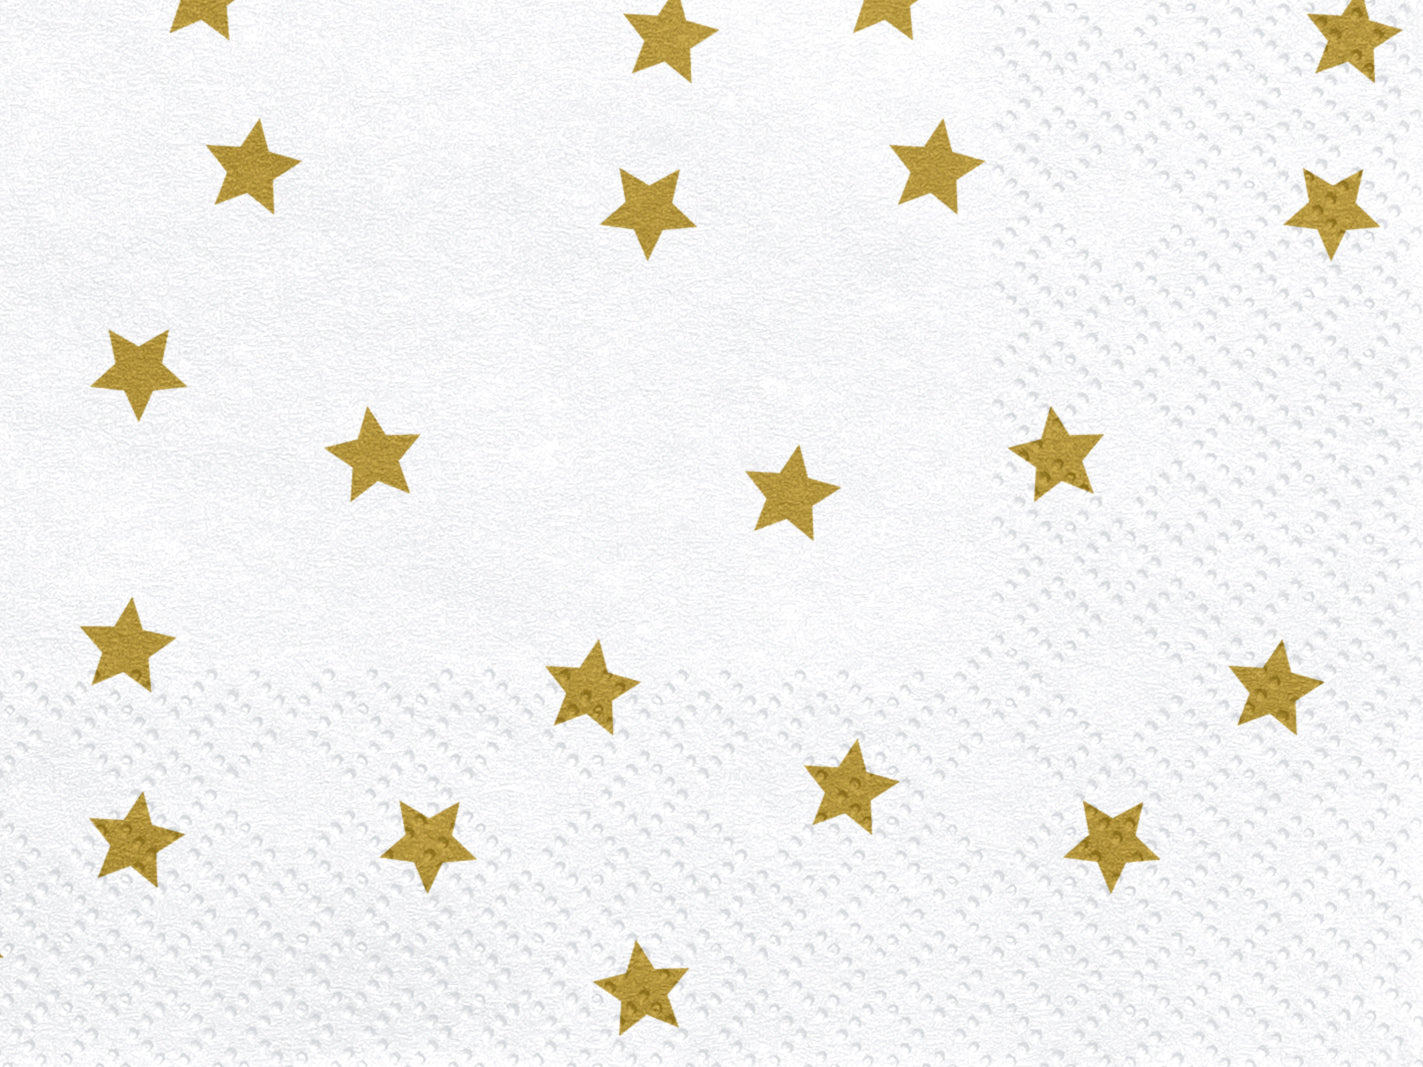 White and Gold Star Napkins 20ct | The Party Darling